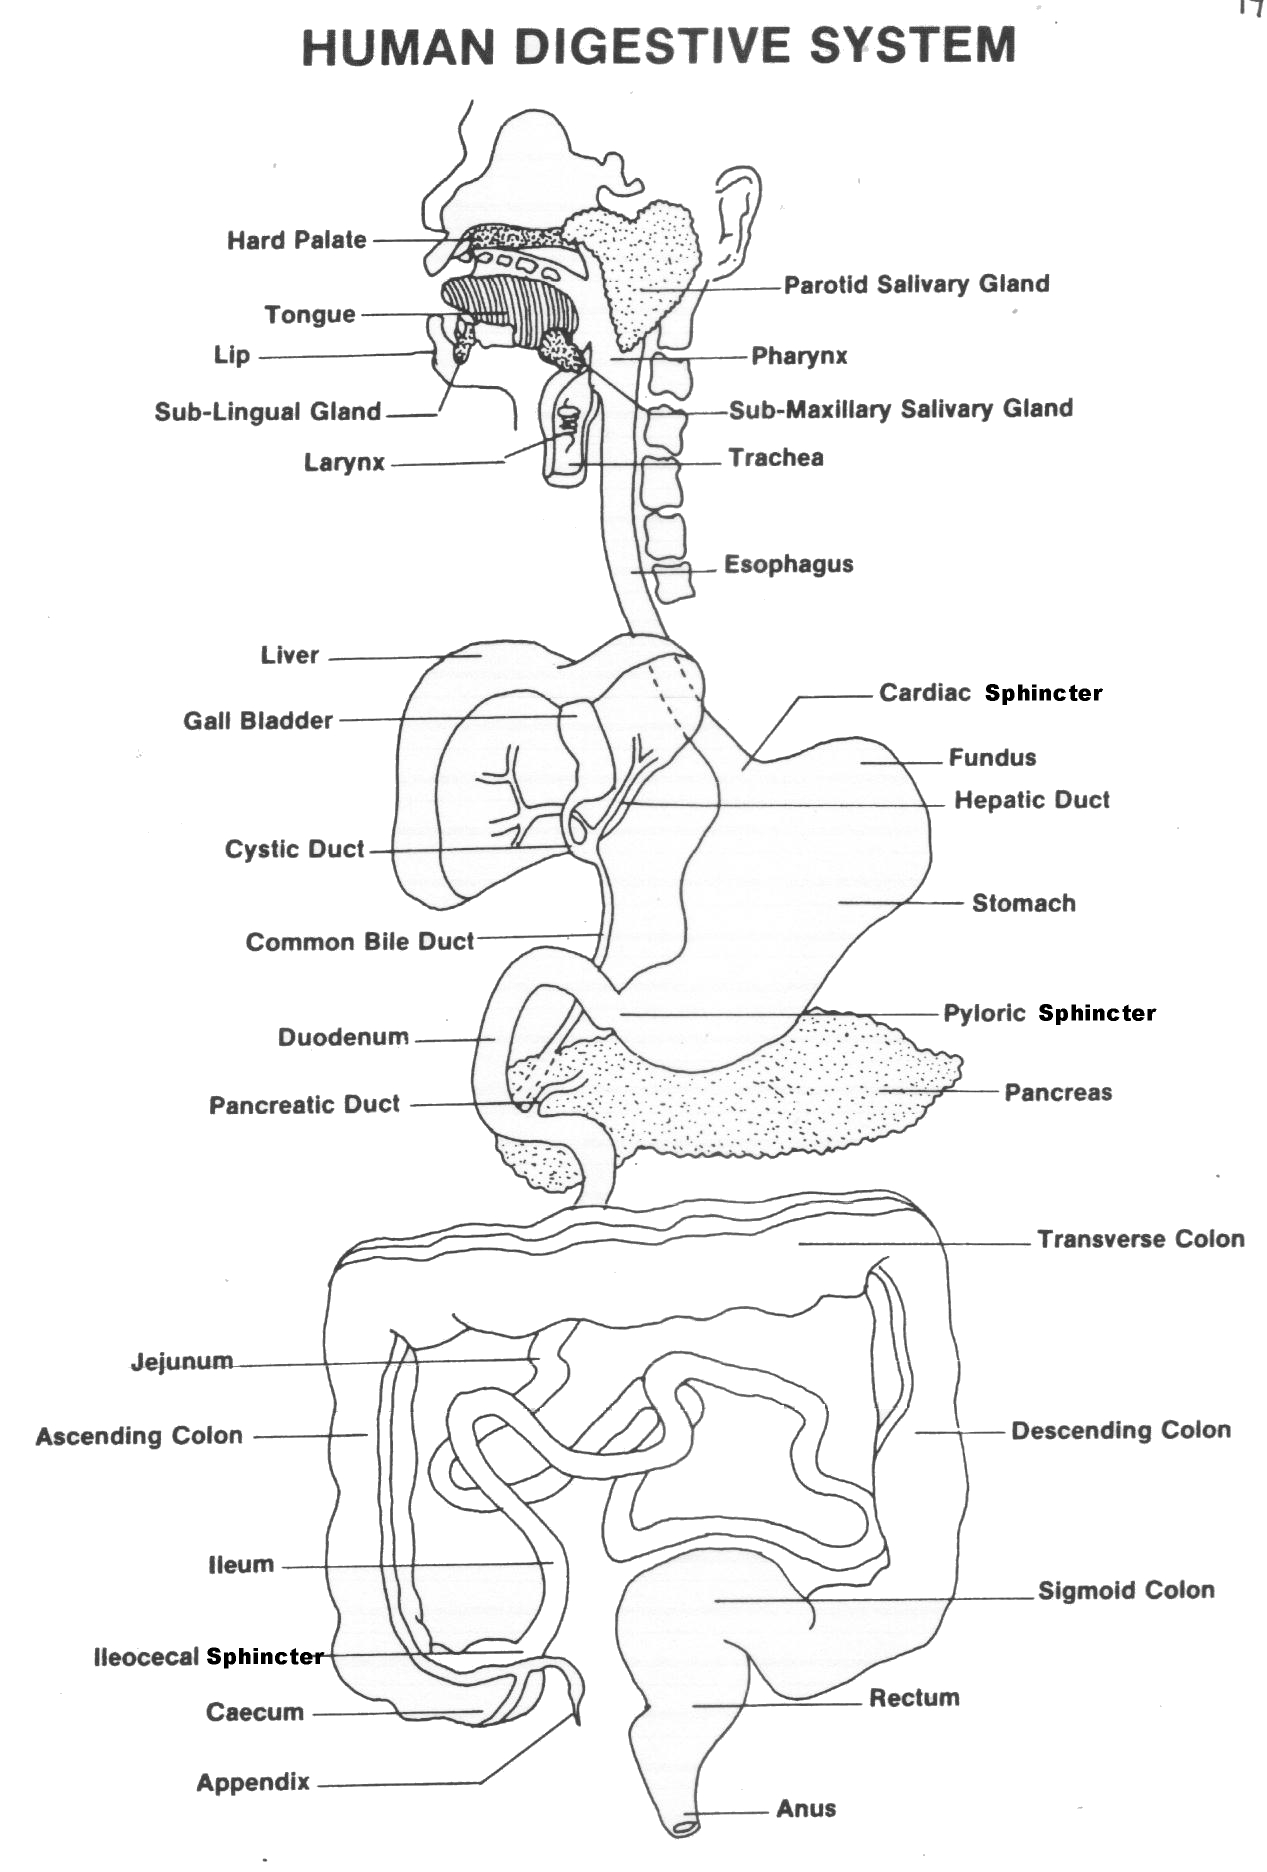 Human Digestive System Worksheet Answers Image